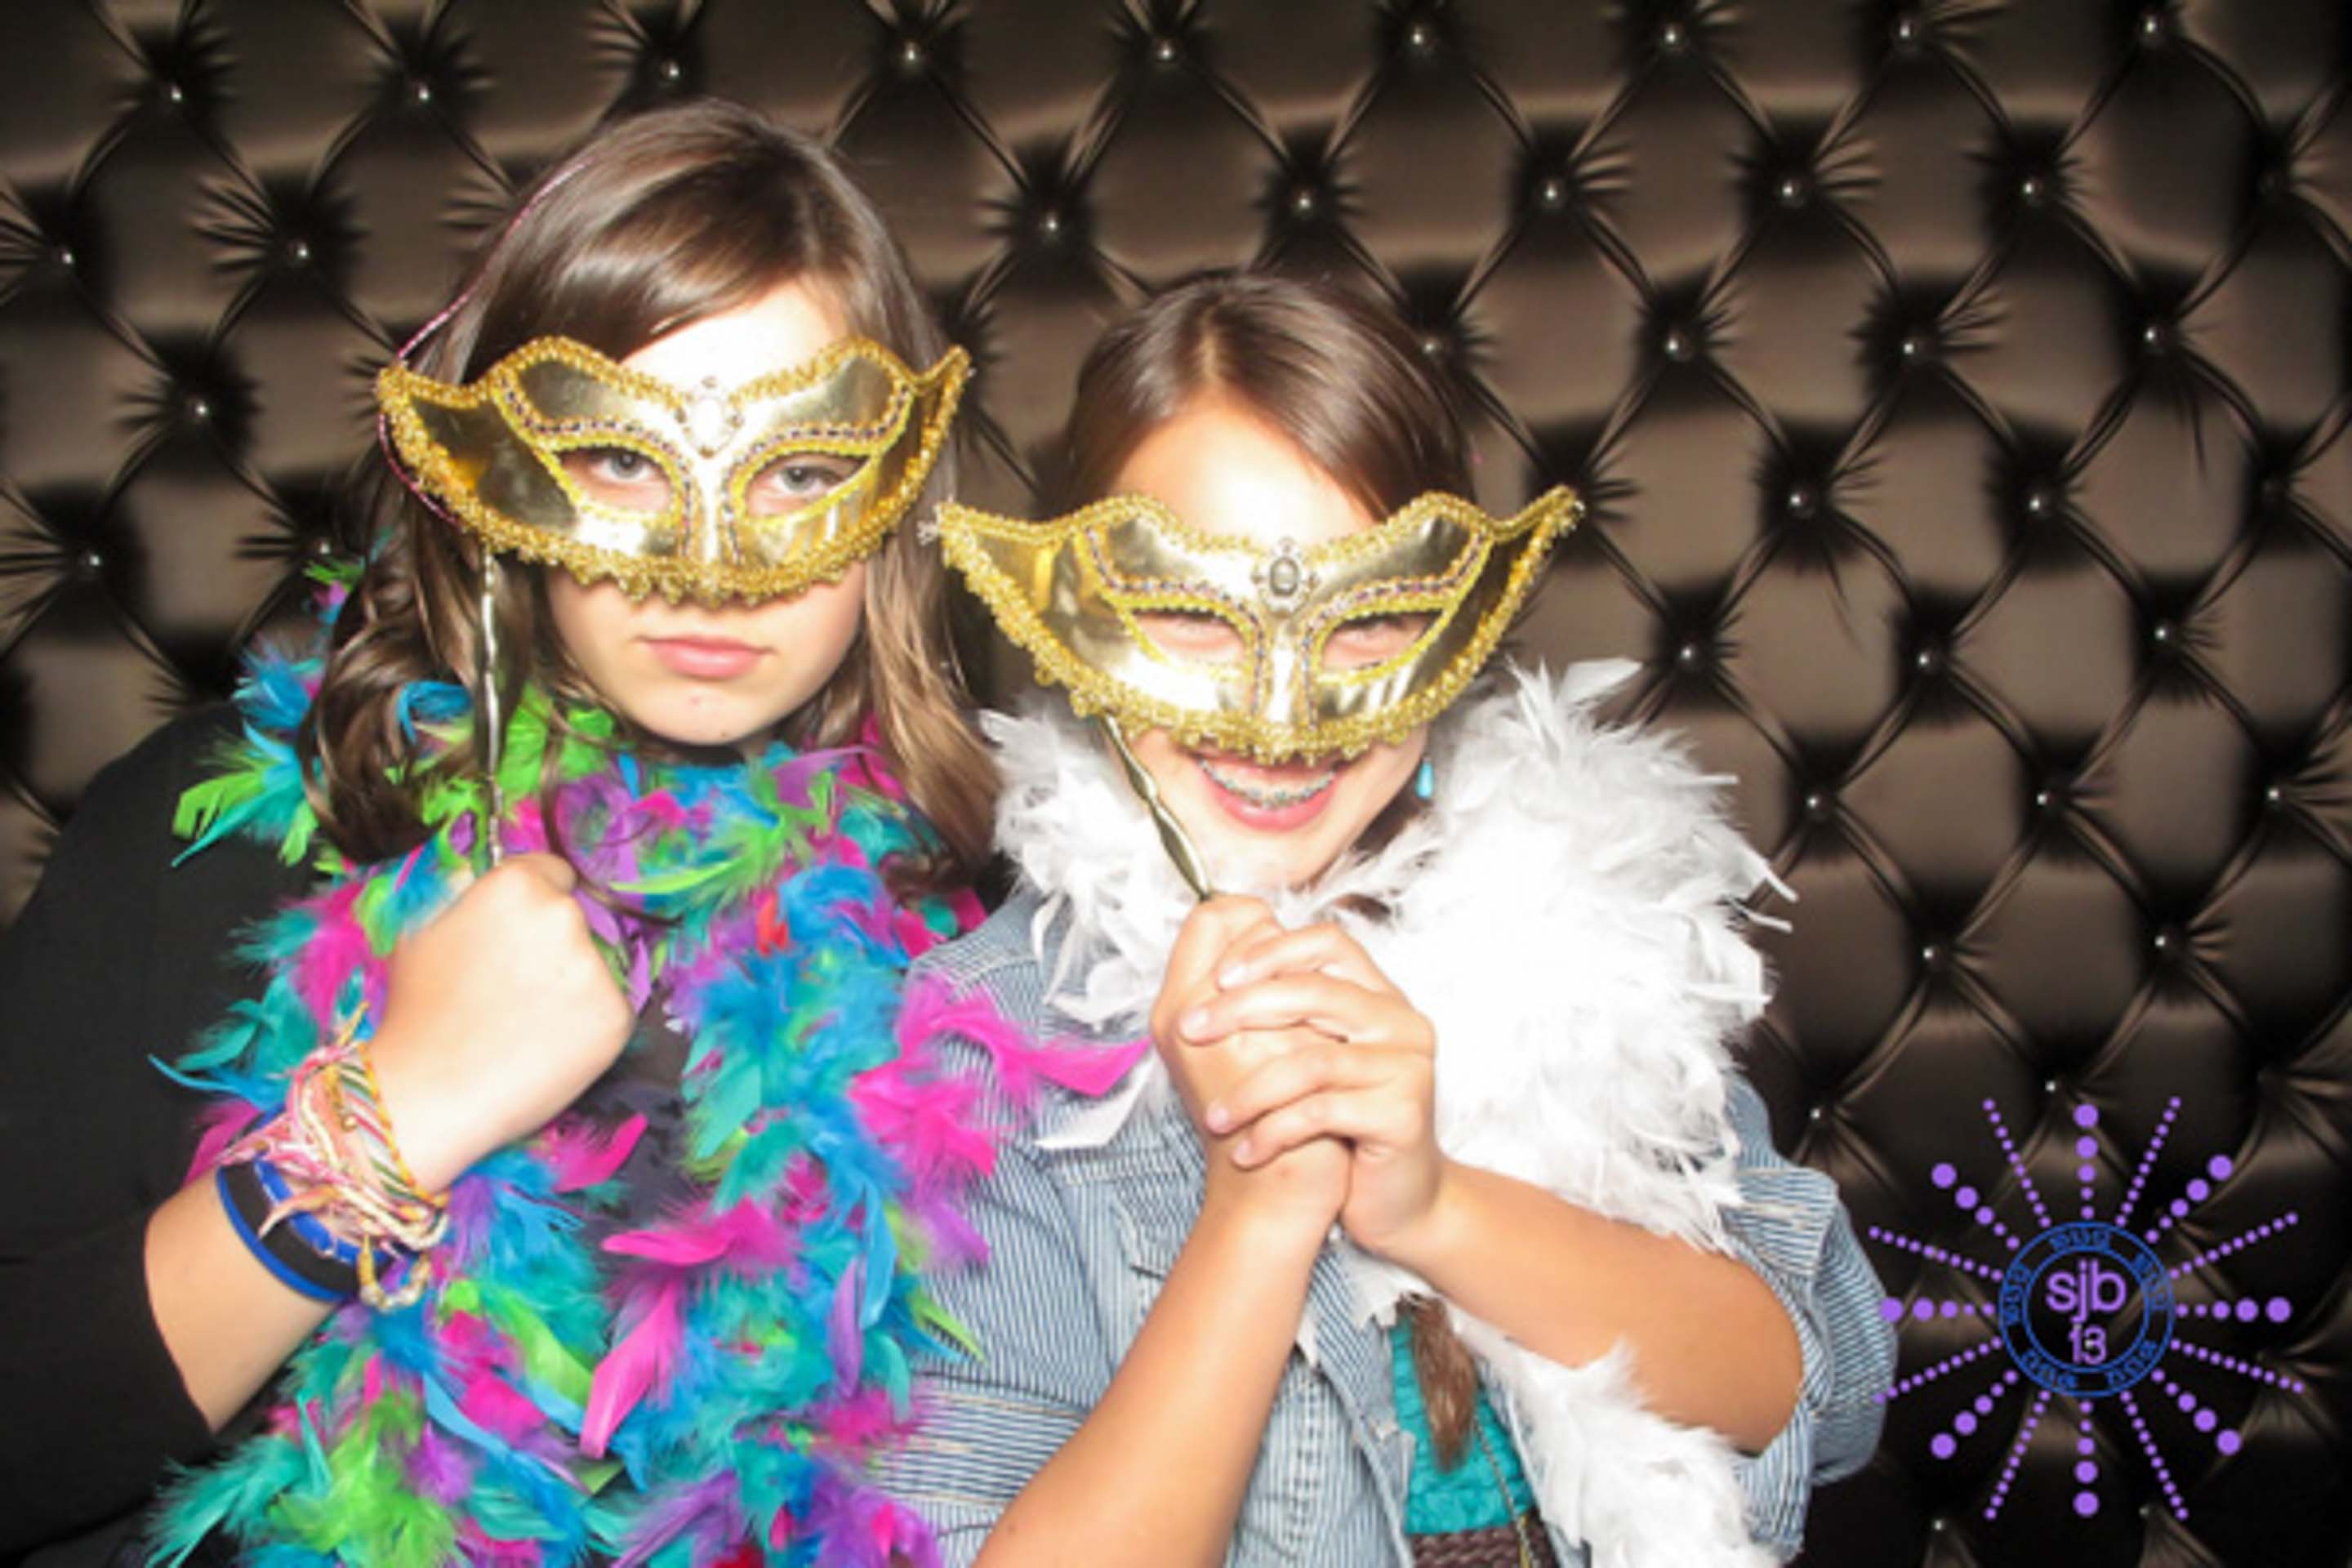 Mitzvah Youbooth - 5th Avenue Digital